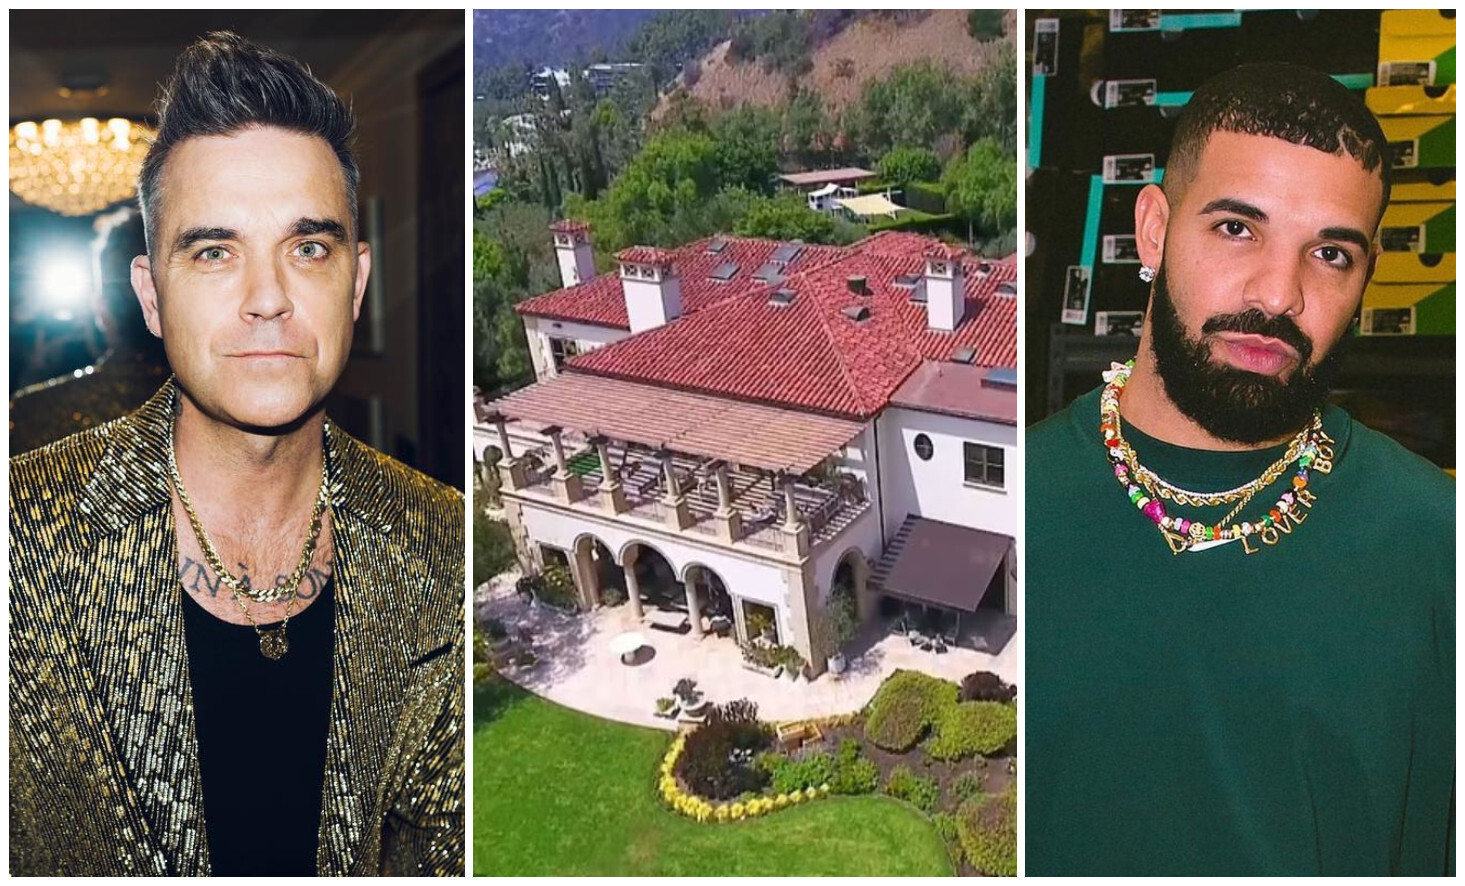 Find out more about the luxurious property that was once housed Robbie Williams but is now going to Drake! Photos: @robbiewilliams/Instagram, ITV/Planet Photos, @drakeofficlal/Instagram